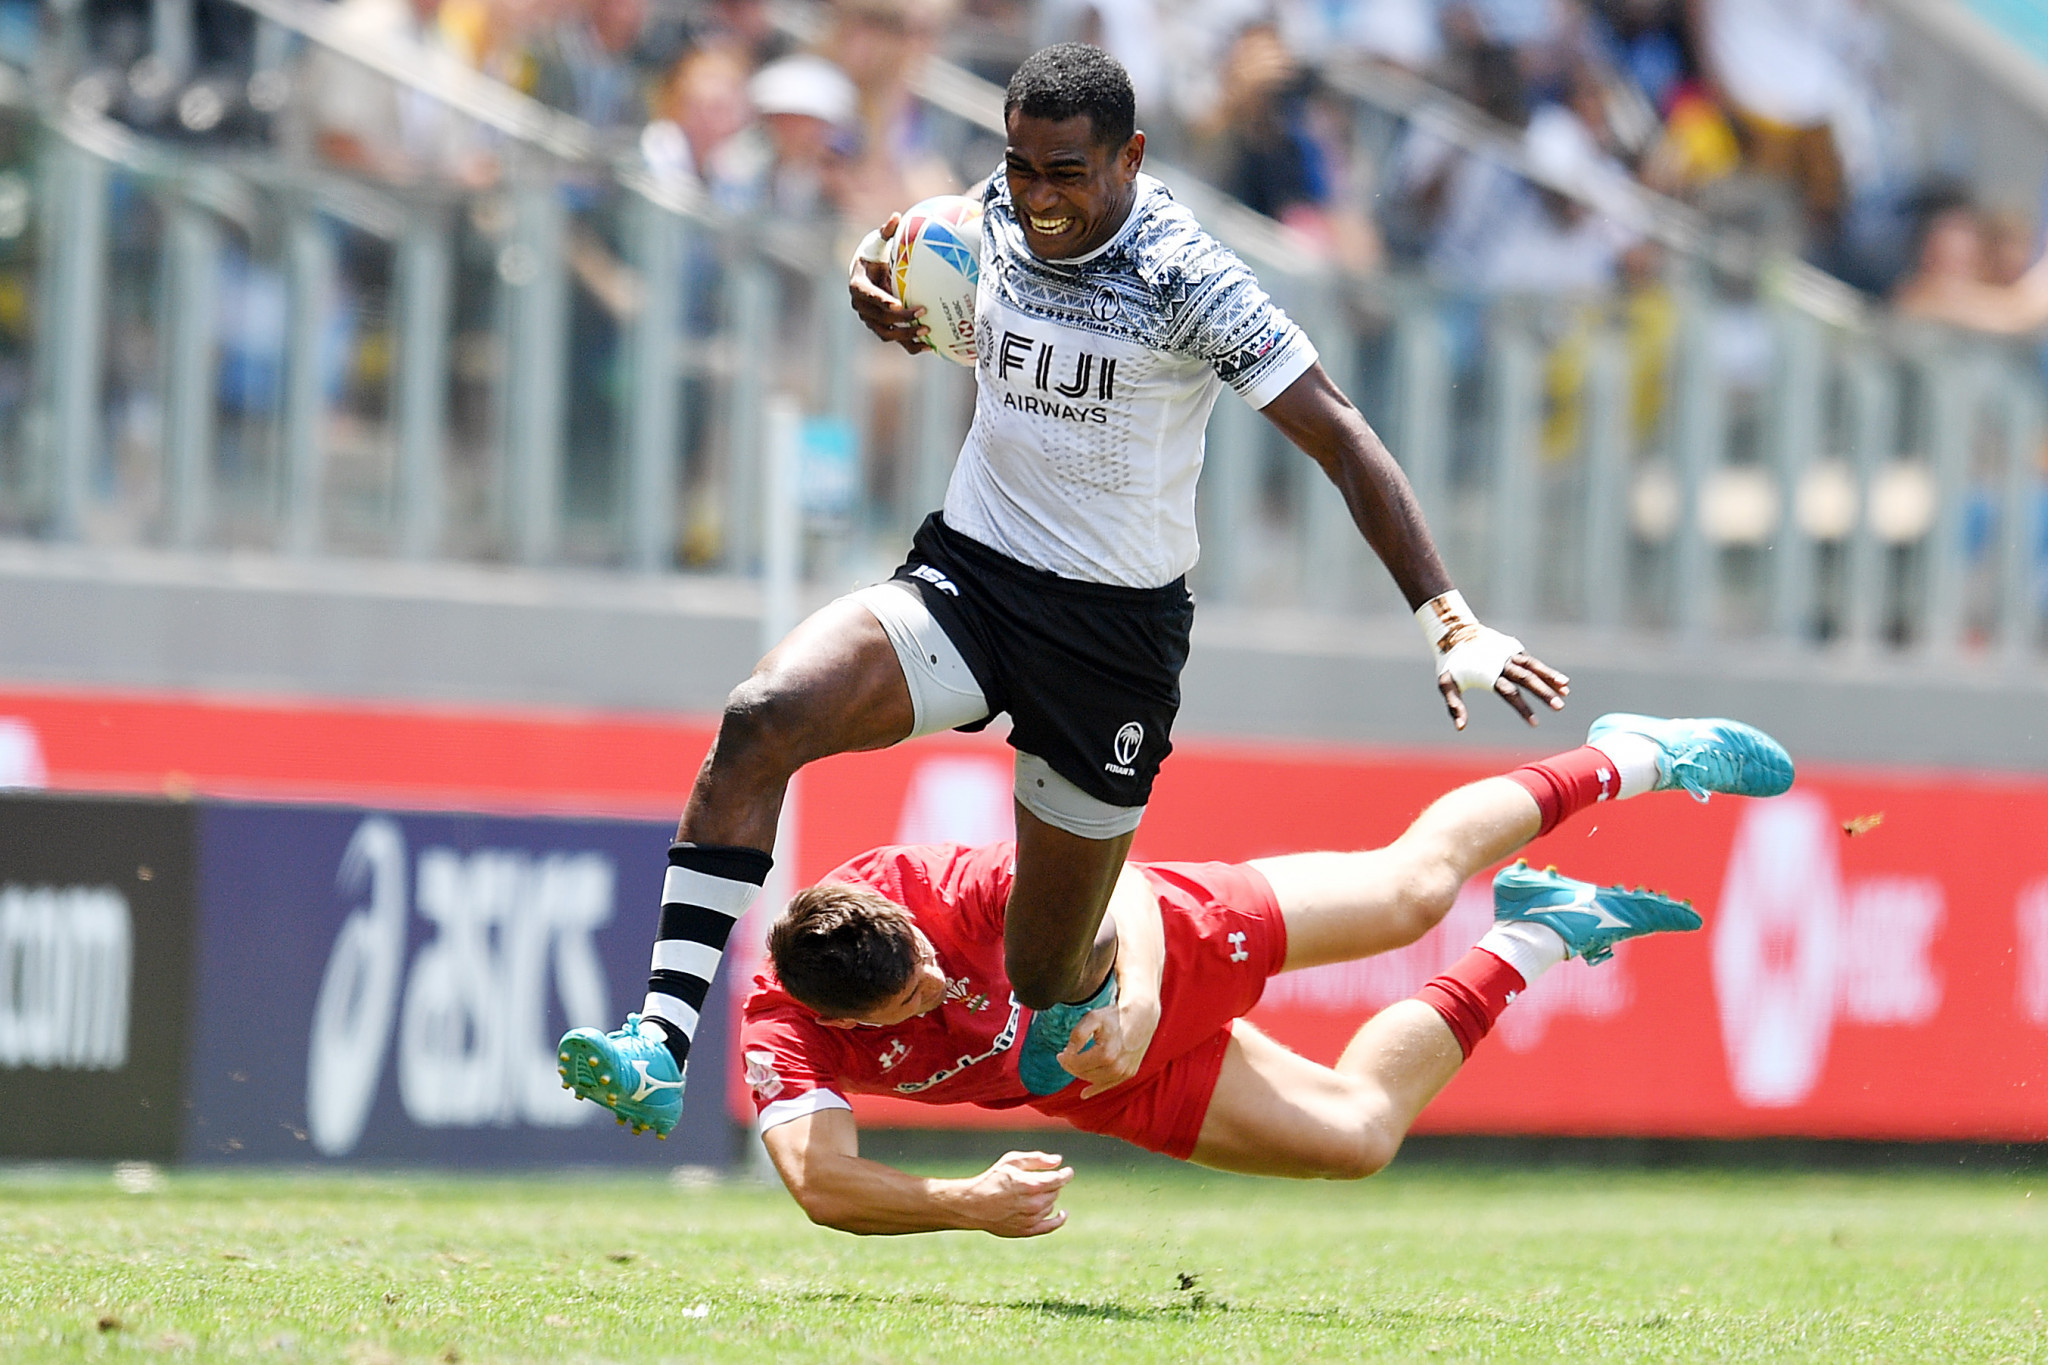 Fiji will seek to defend their men's rugby sevens title at Tokyo 2020 ©Getty Images